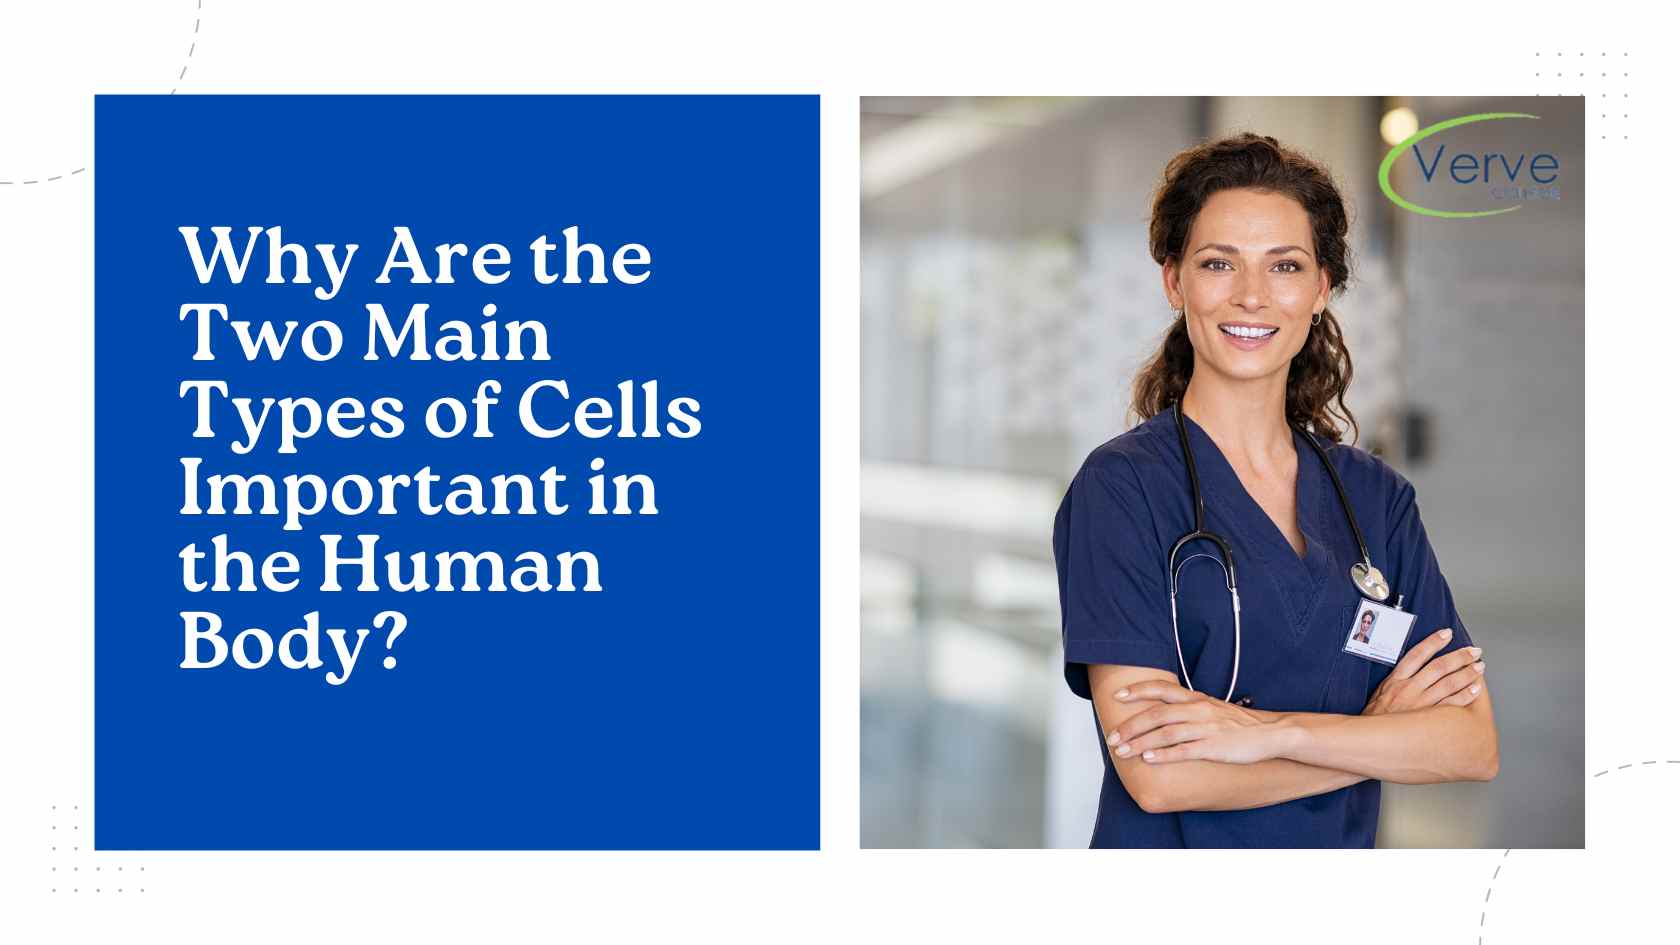 Why Are the Two Main Types of Cells Important in the Human Body?